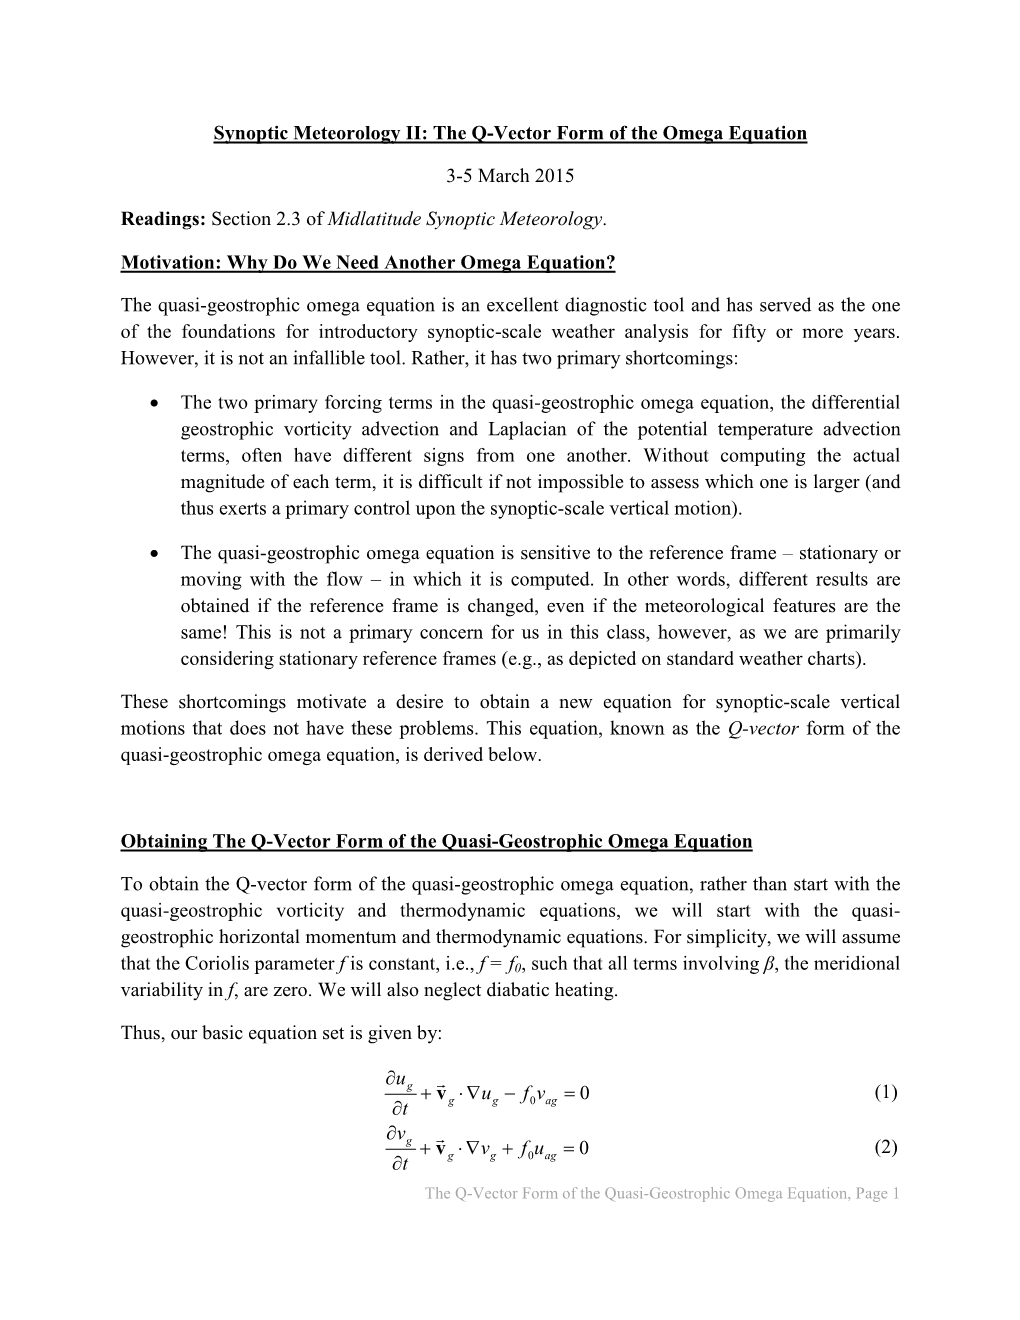 Synoptic Meteorology II: the Q-Vector Form of the Omega Equation 3-5